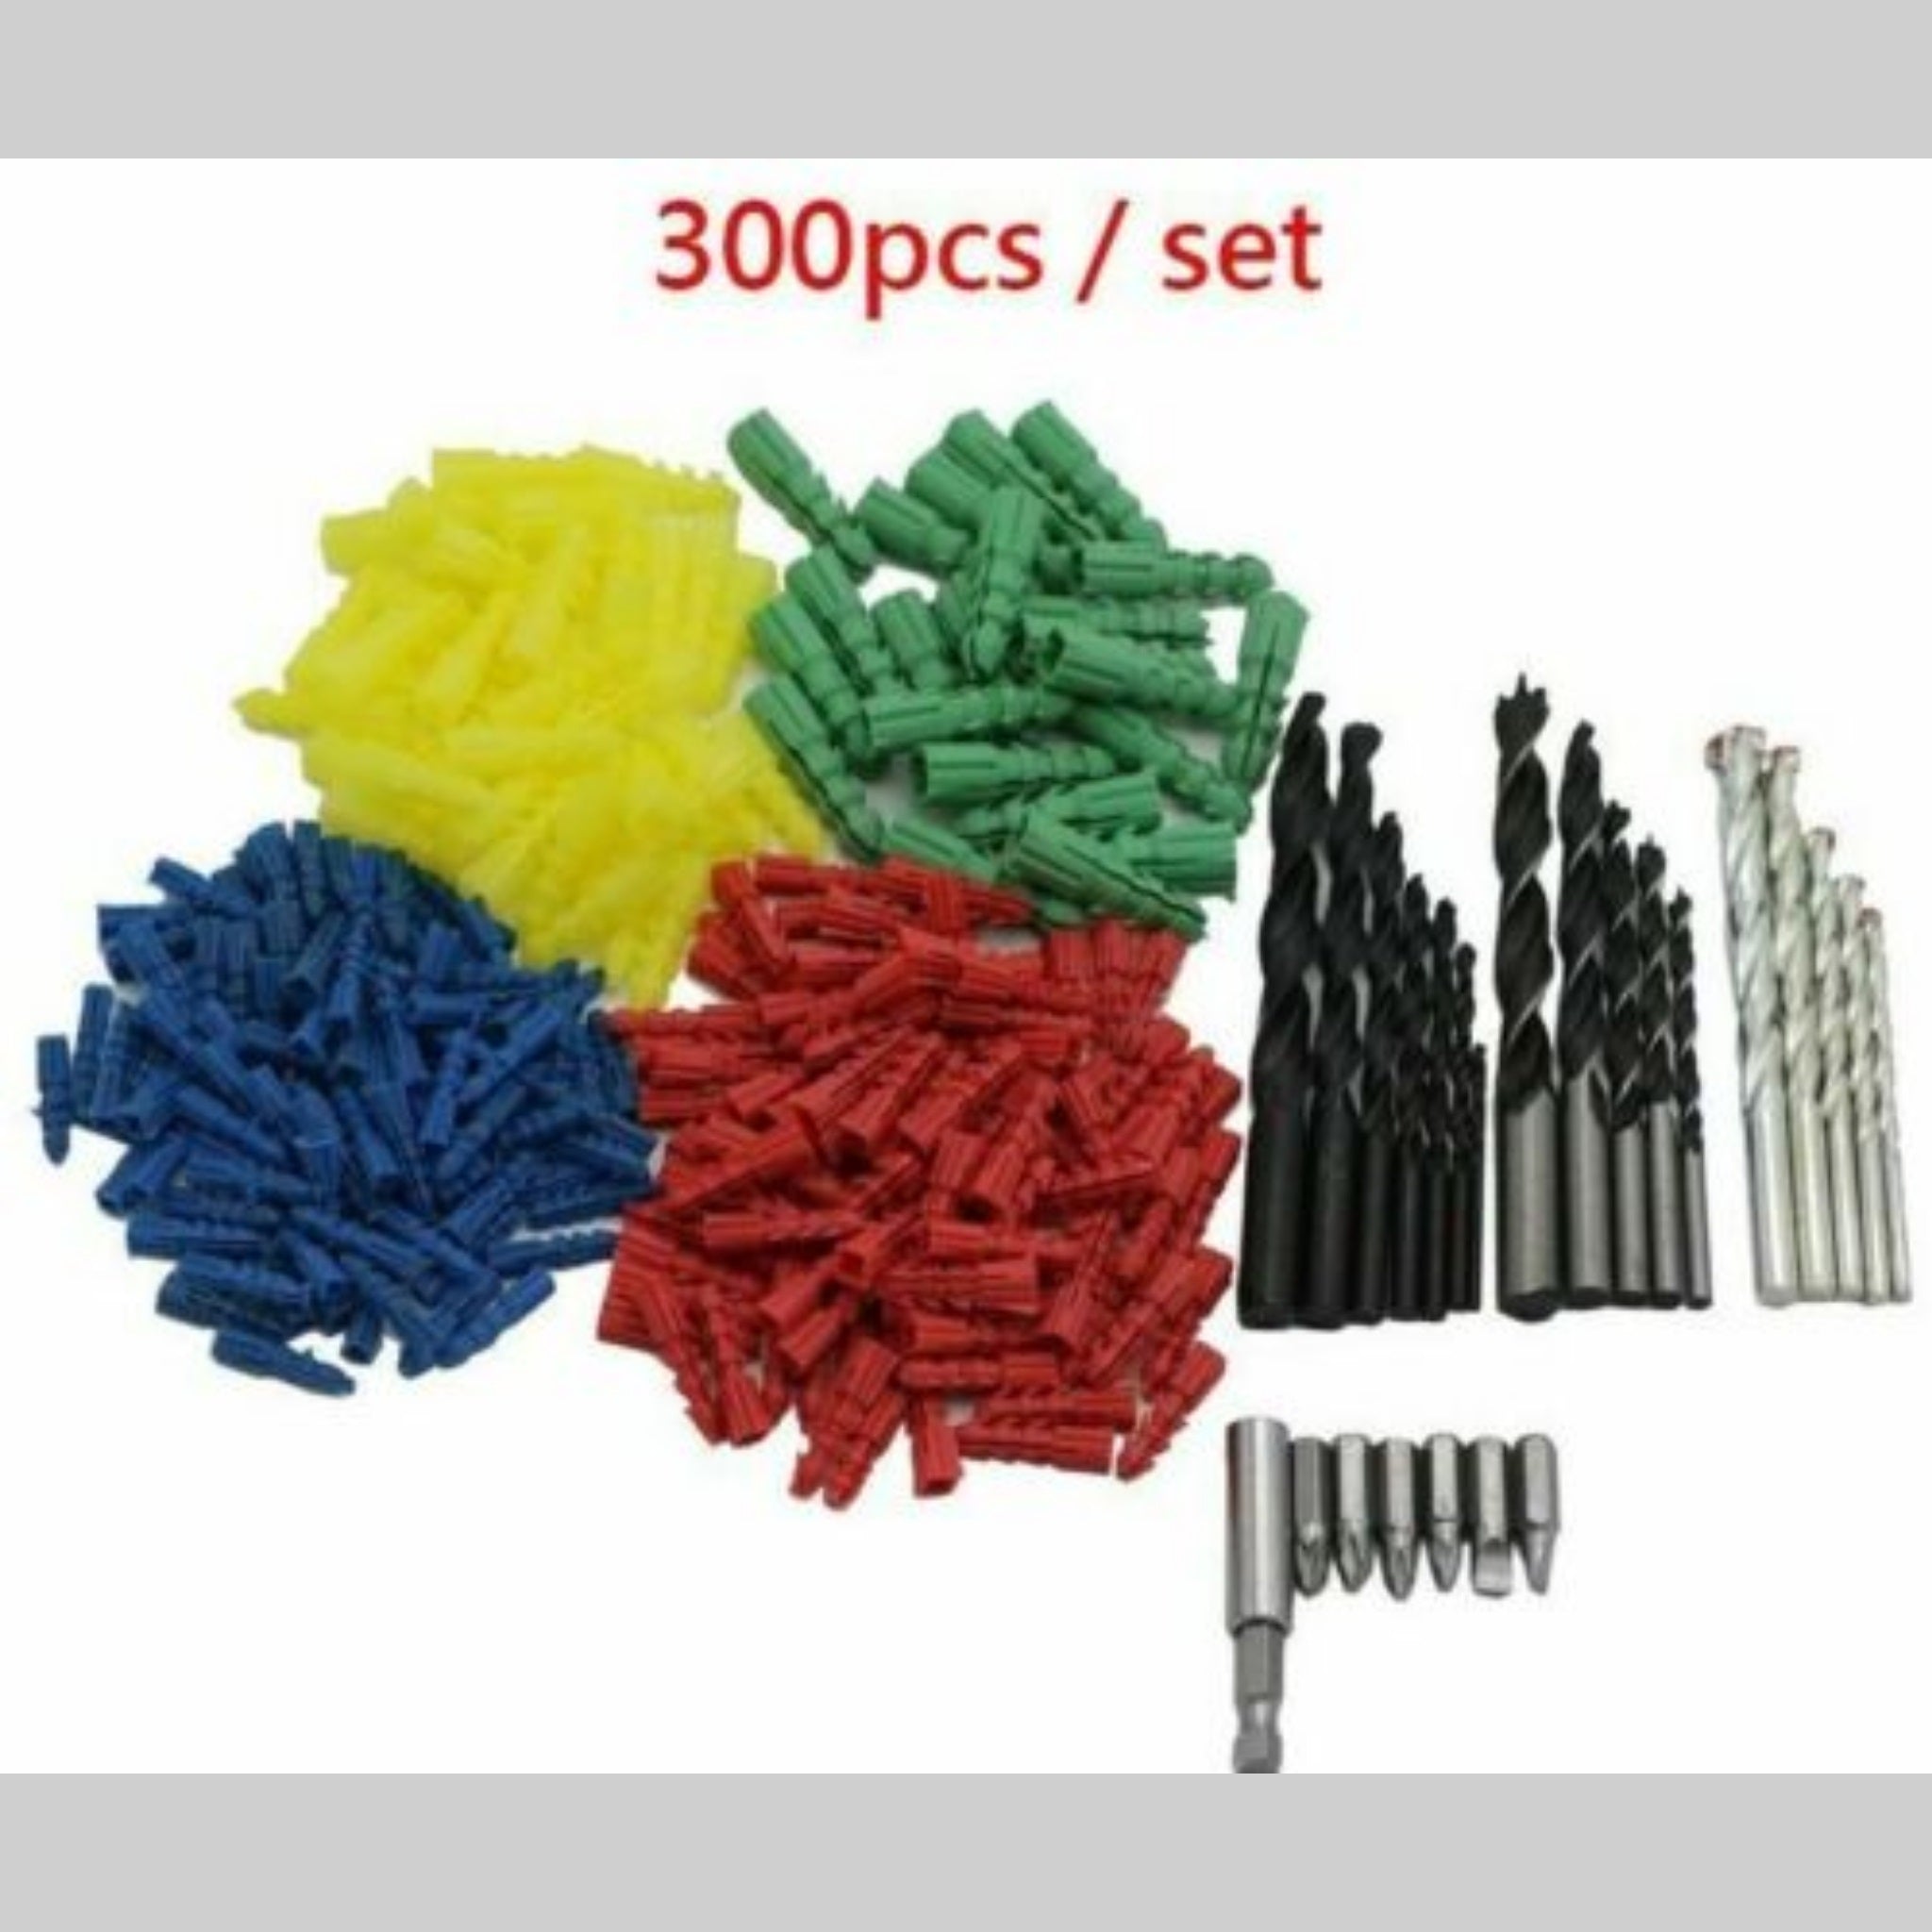 Beclen Harp Heavy Duty Drill Bits Masonry Wood Metal Material & Wall Plug Set 300 Pieces Multi-surface Bit Set With Box